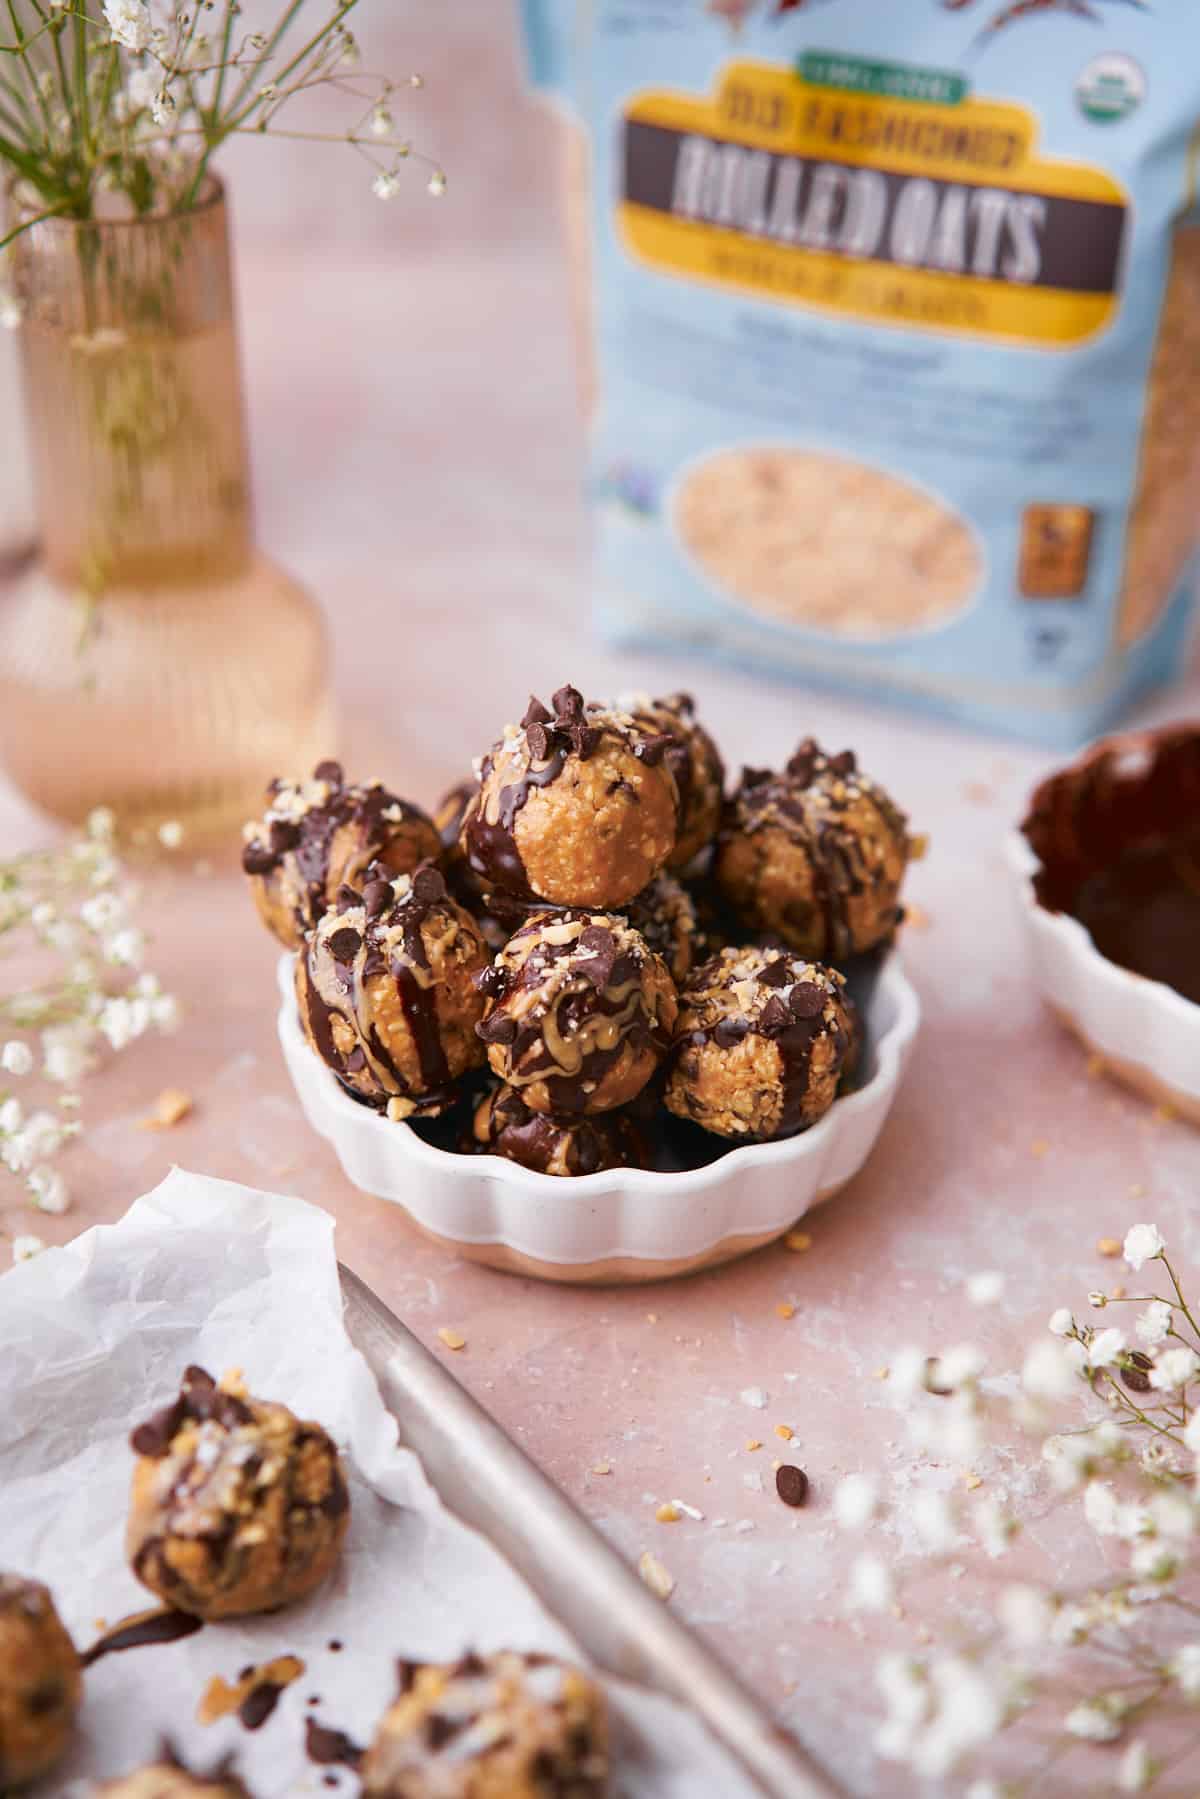 Chocolate and peanut butter bliss balls in a dish with flowers and scene surrounding it.